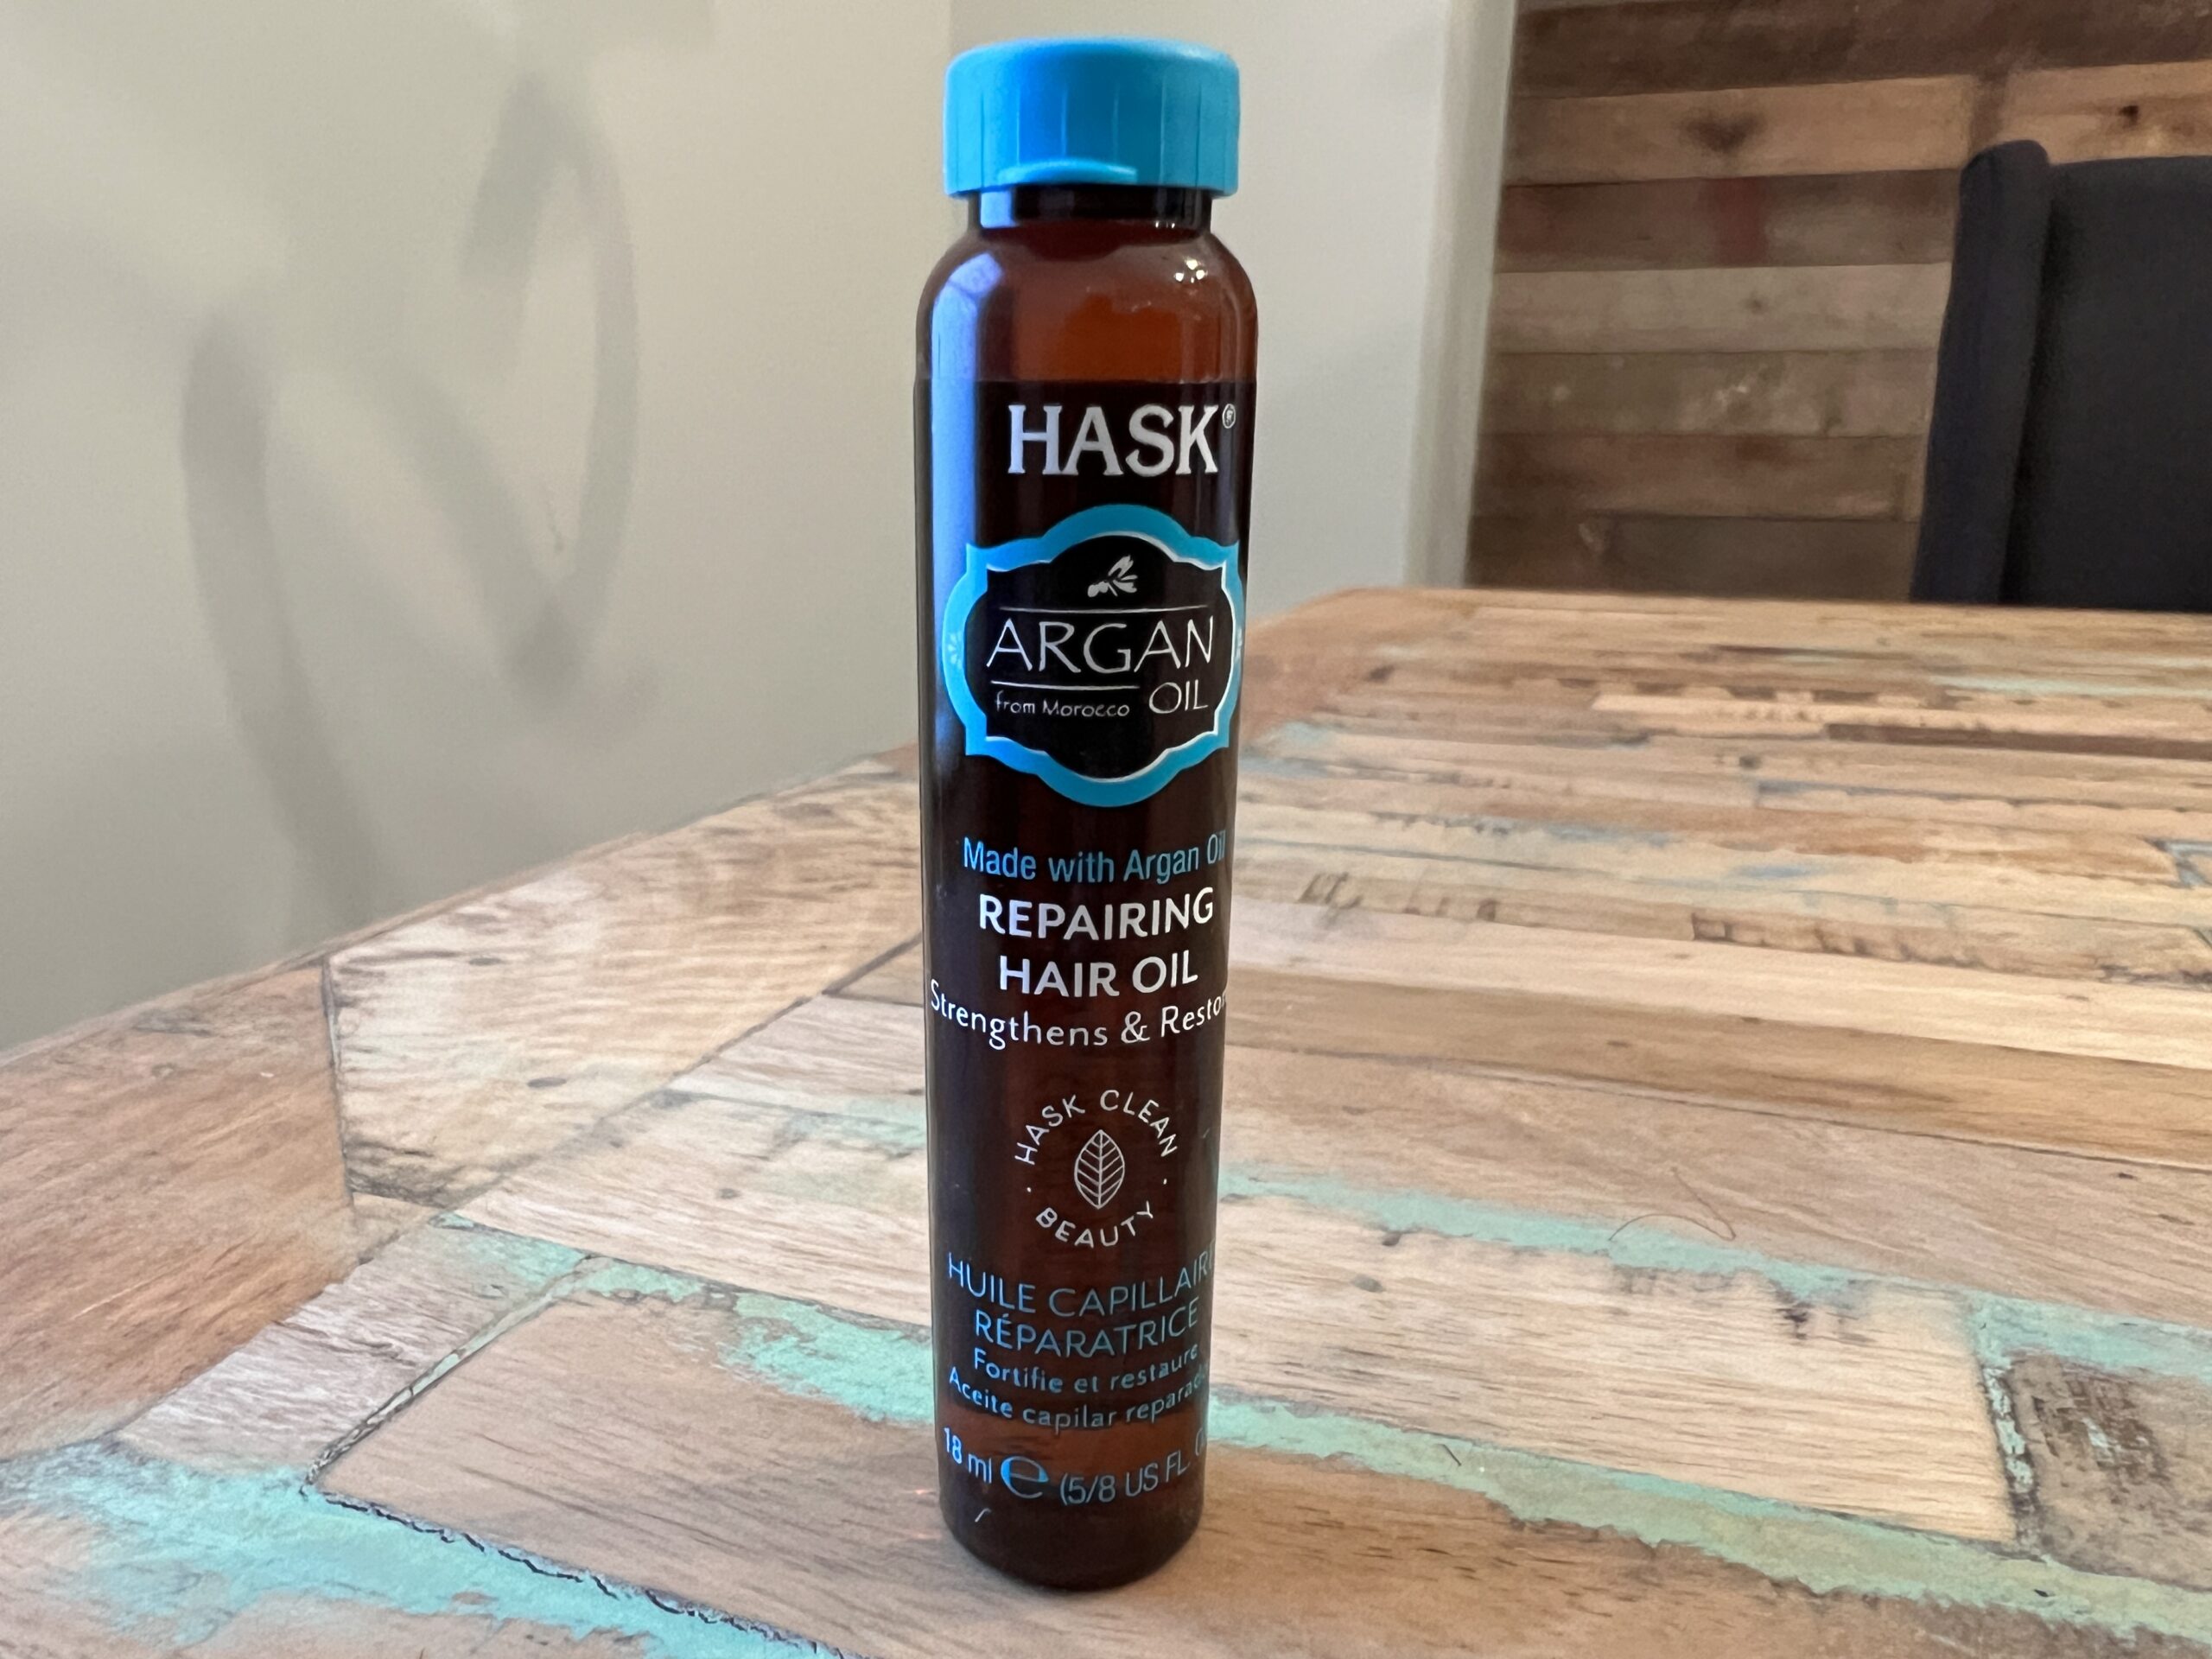 Hask Argan Oil from Morocco is a repairing hair oil that strengthens and restores